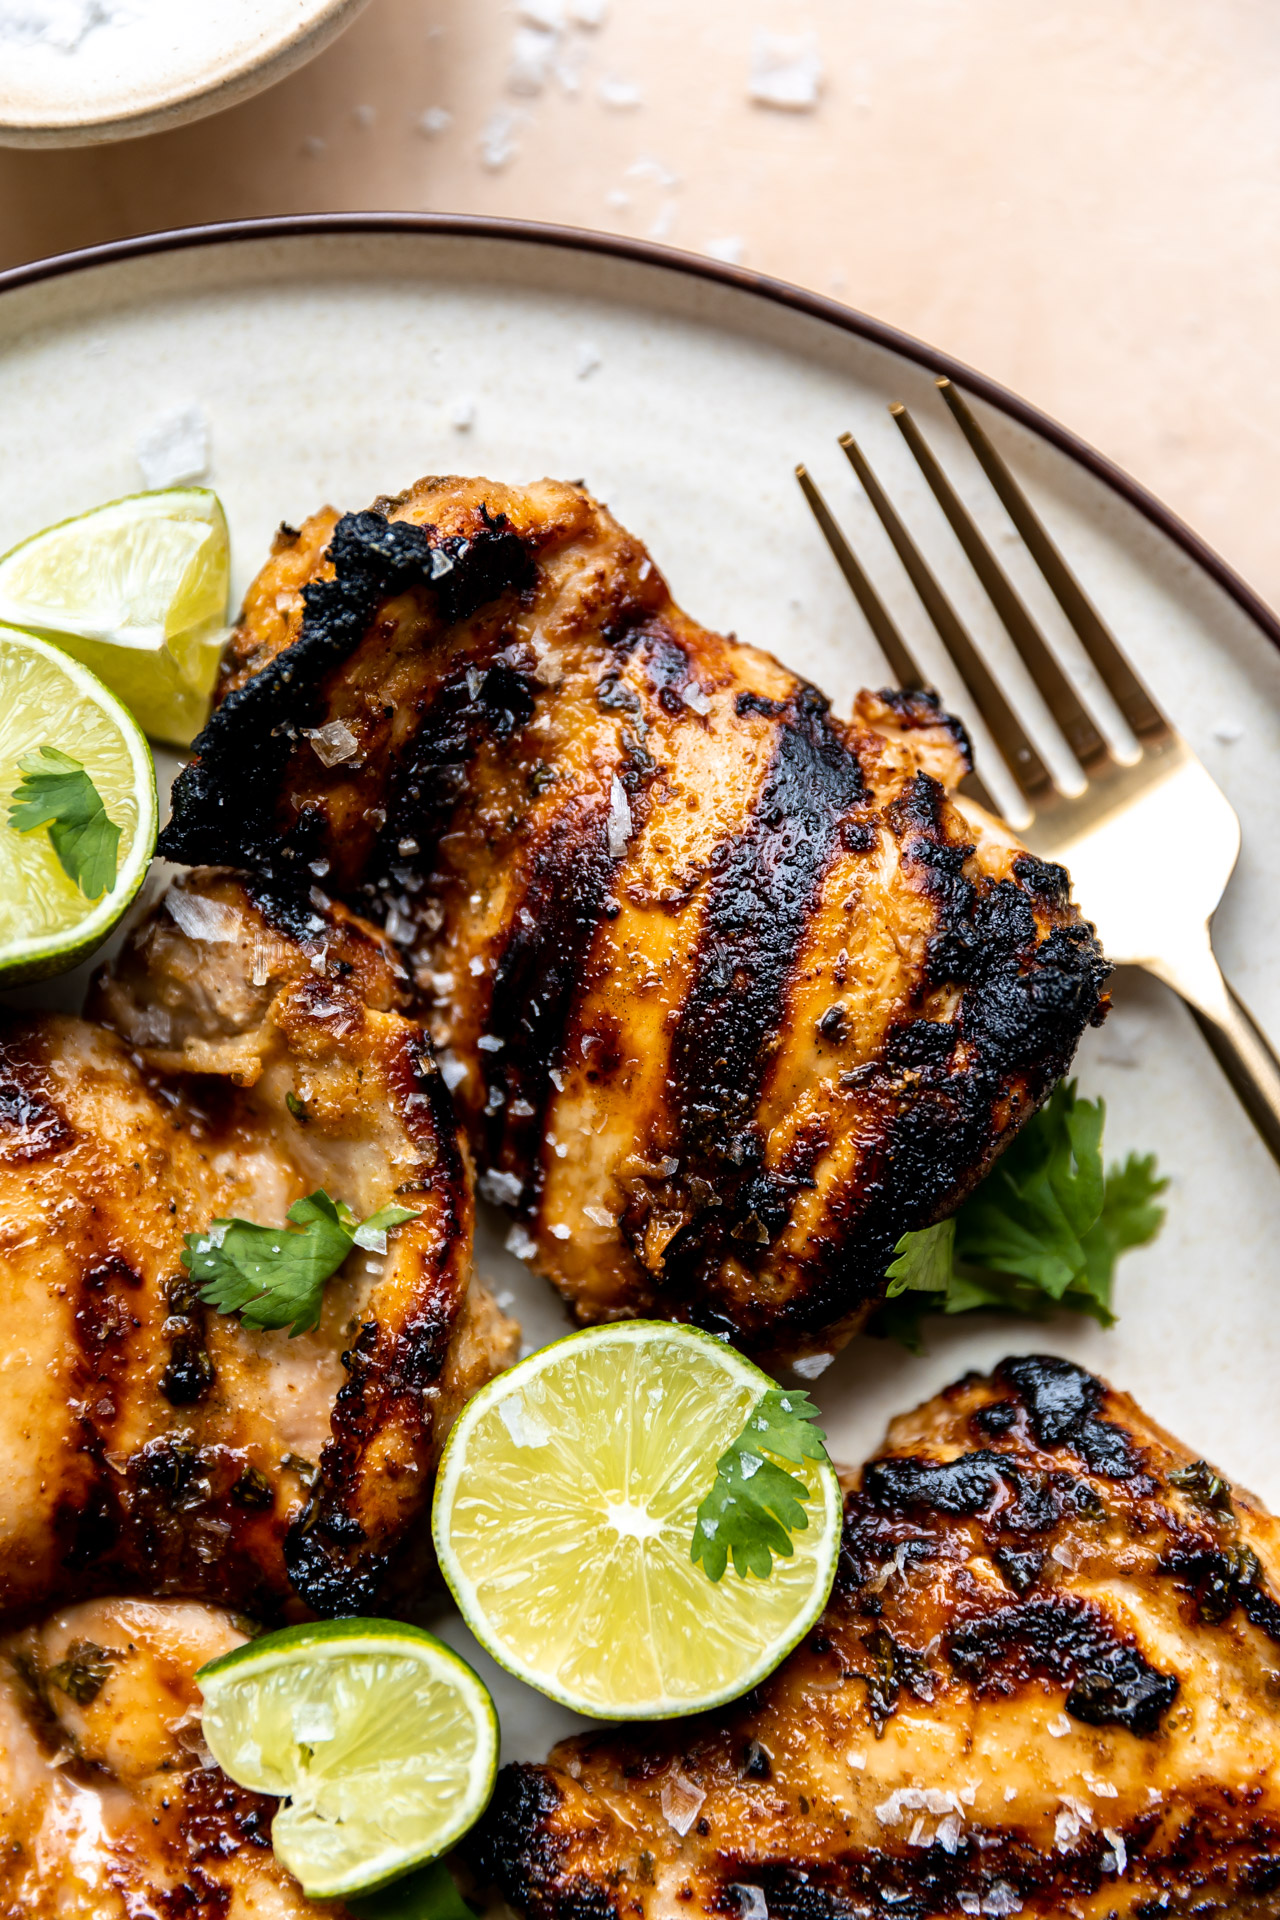 Grilled chicken on a white plate.